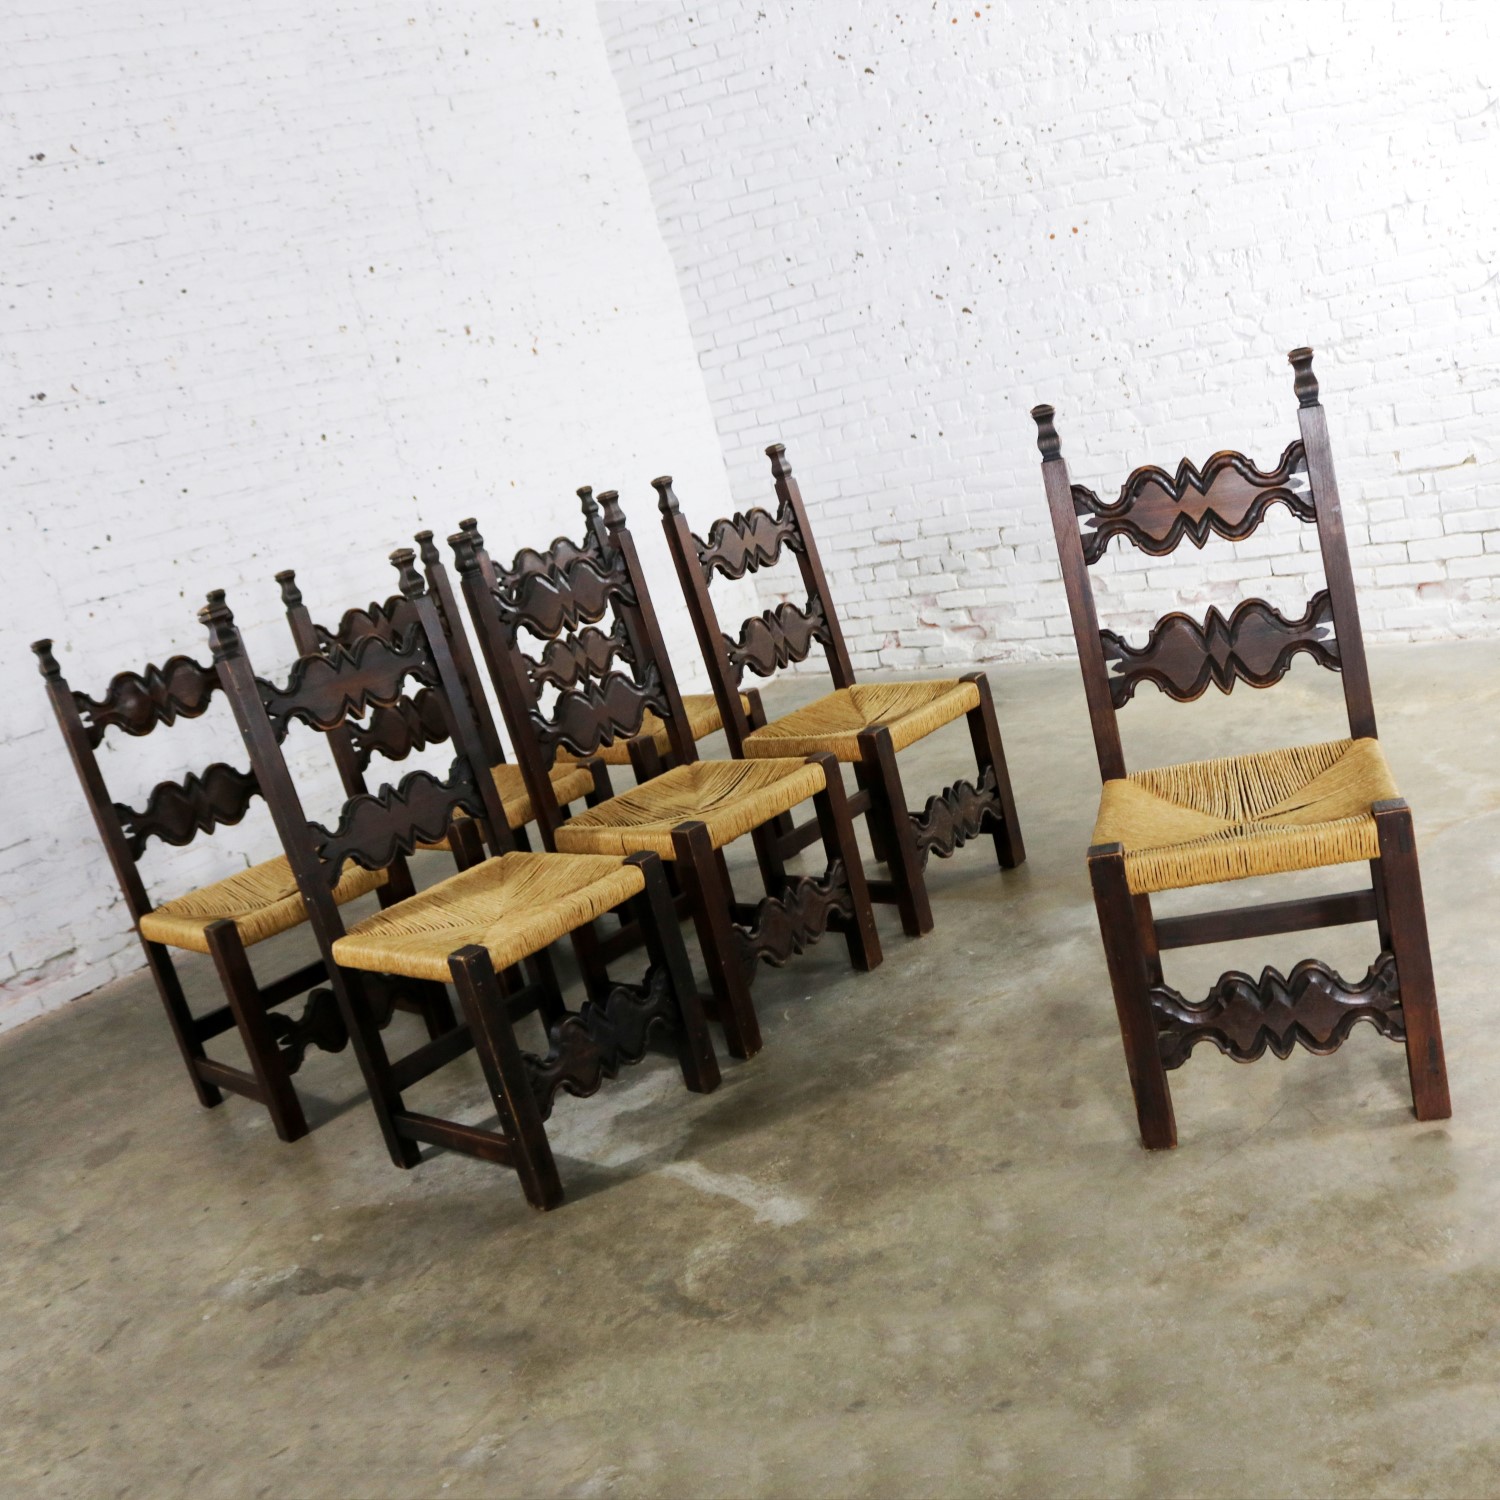 7 Spanish Revival Style Dining Chairs with Rush Seats Artes De Mexico Internacionales SA